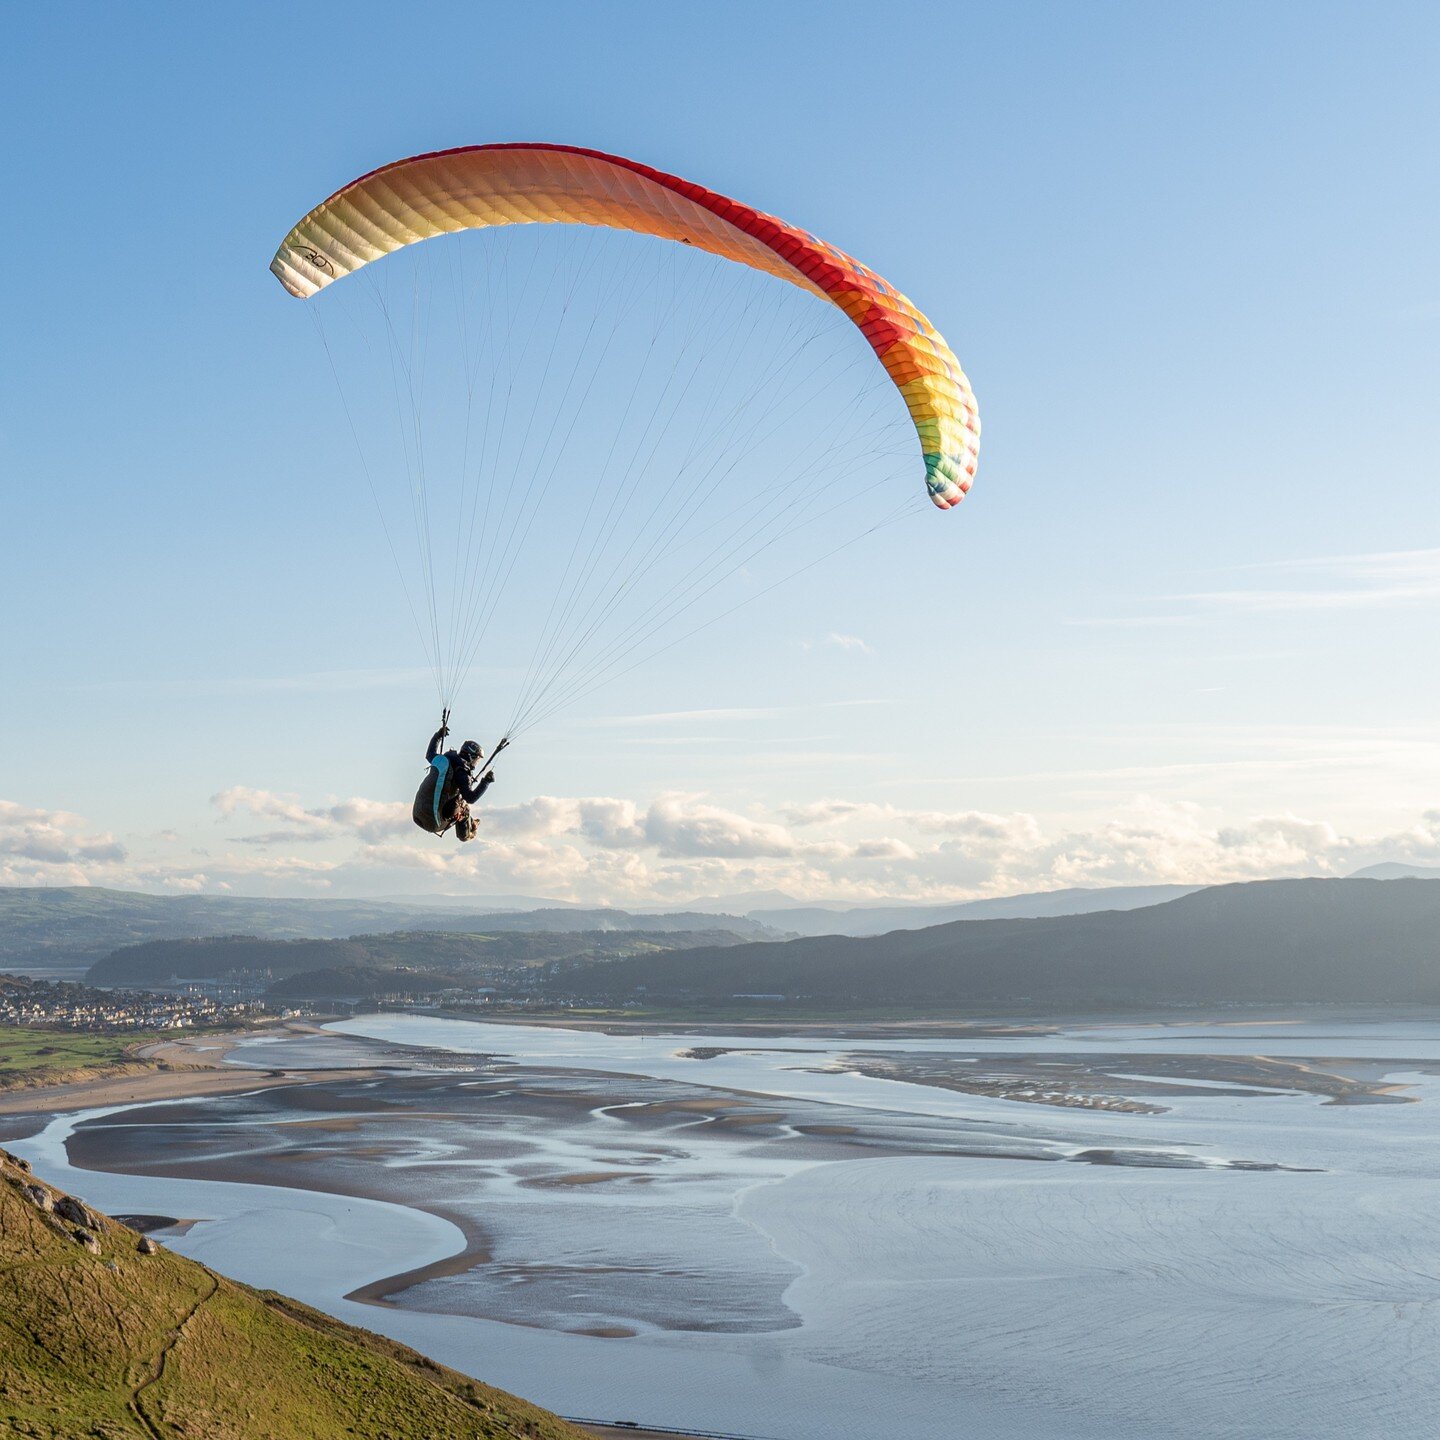 Paragliding off the side of The Great Orme, Llandudno on new year's day. Conwy castle is directly below him in the far distance.
-
-
-
-
-
-
-
#northwales 
#northwalestagram 
#northwalescoast 
#northwalesinstagram 
#paragliding 
#paraglider 
#conwyes